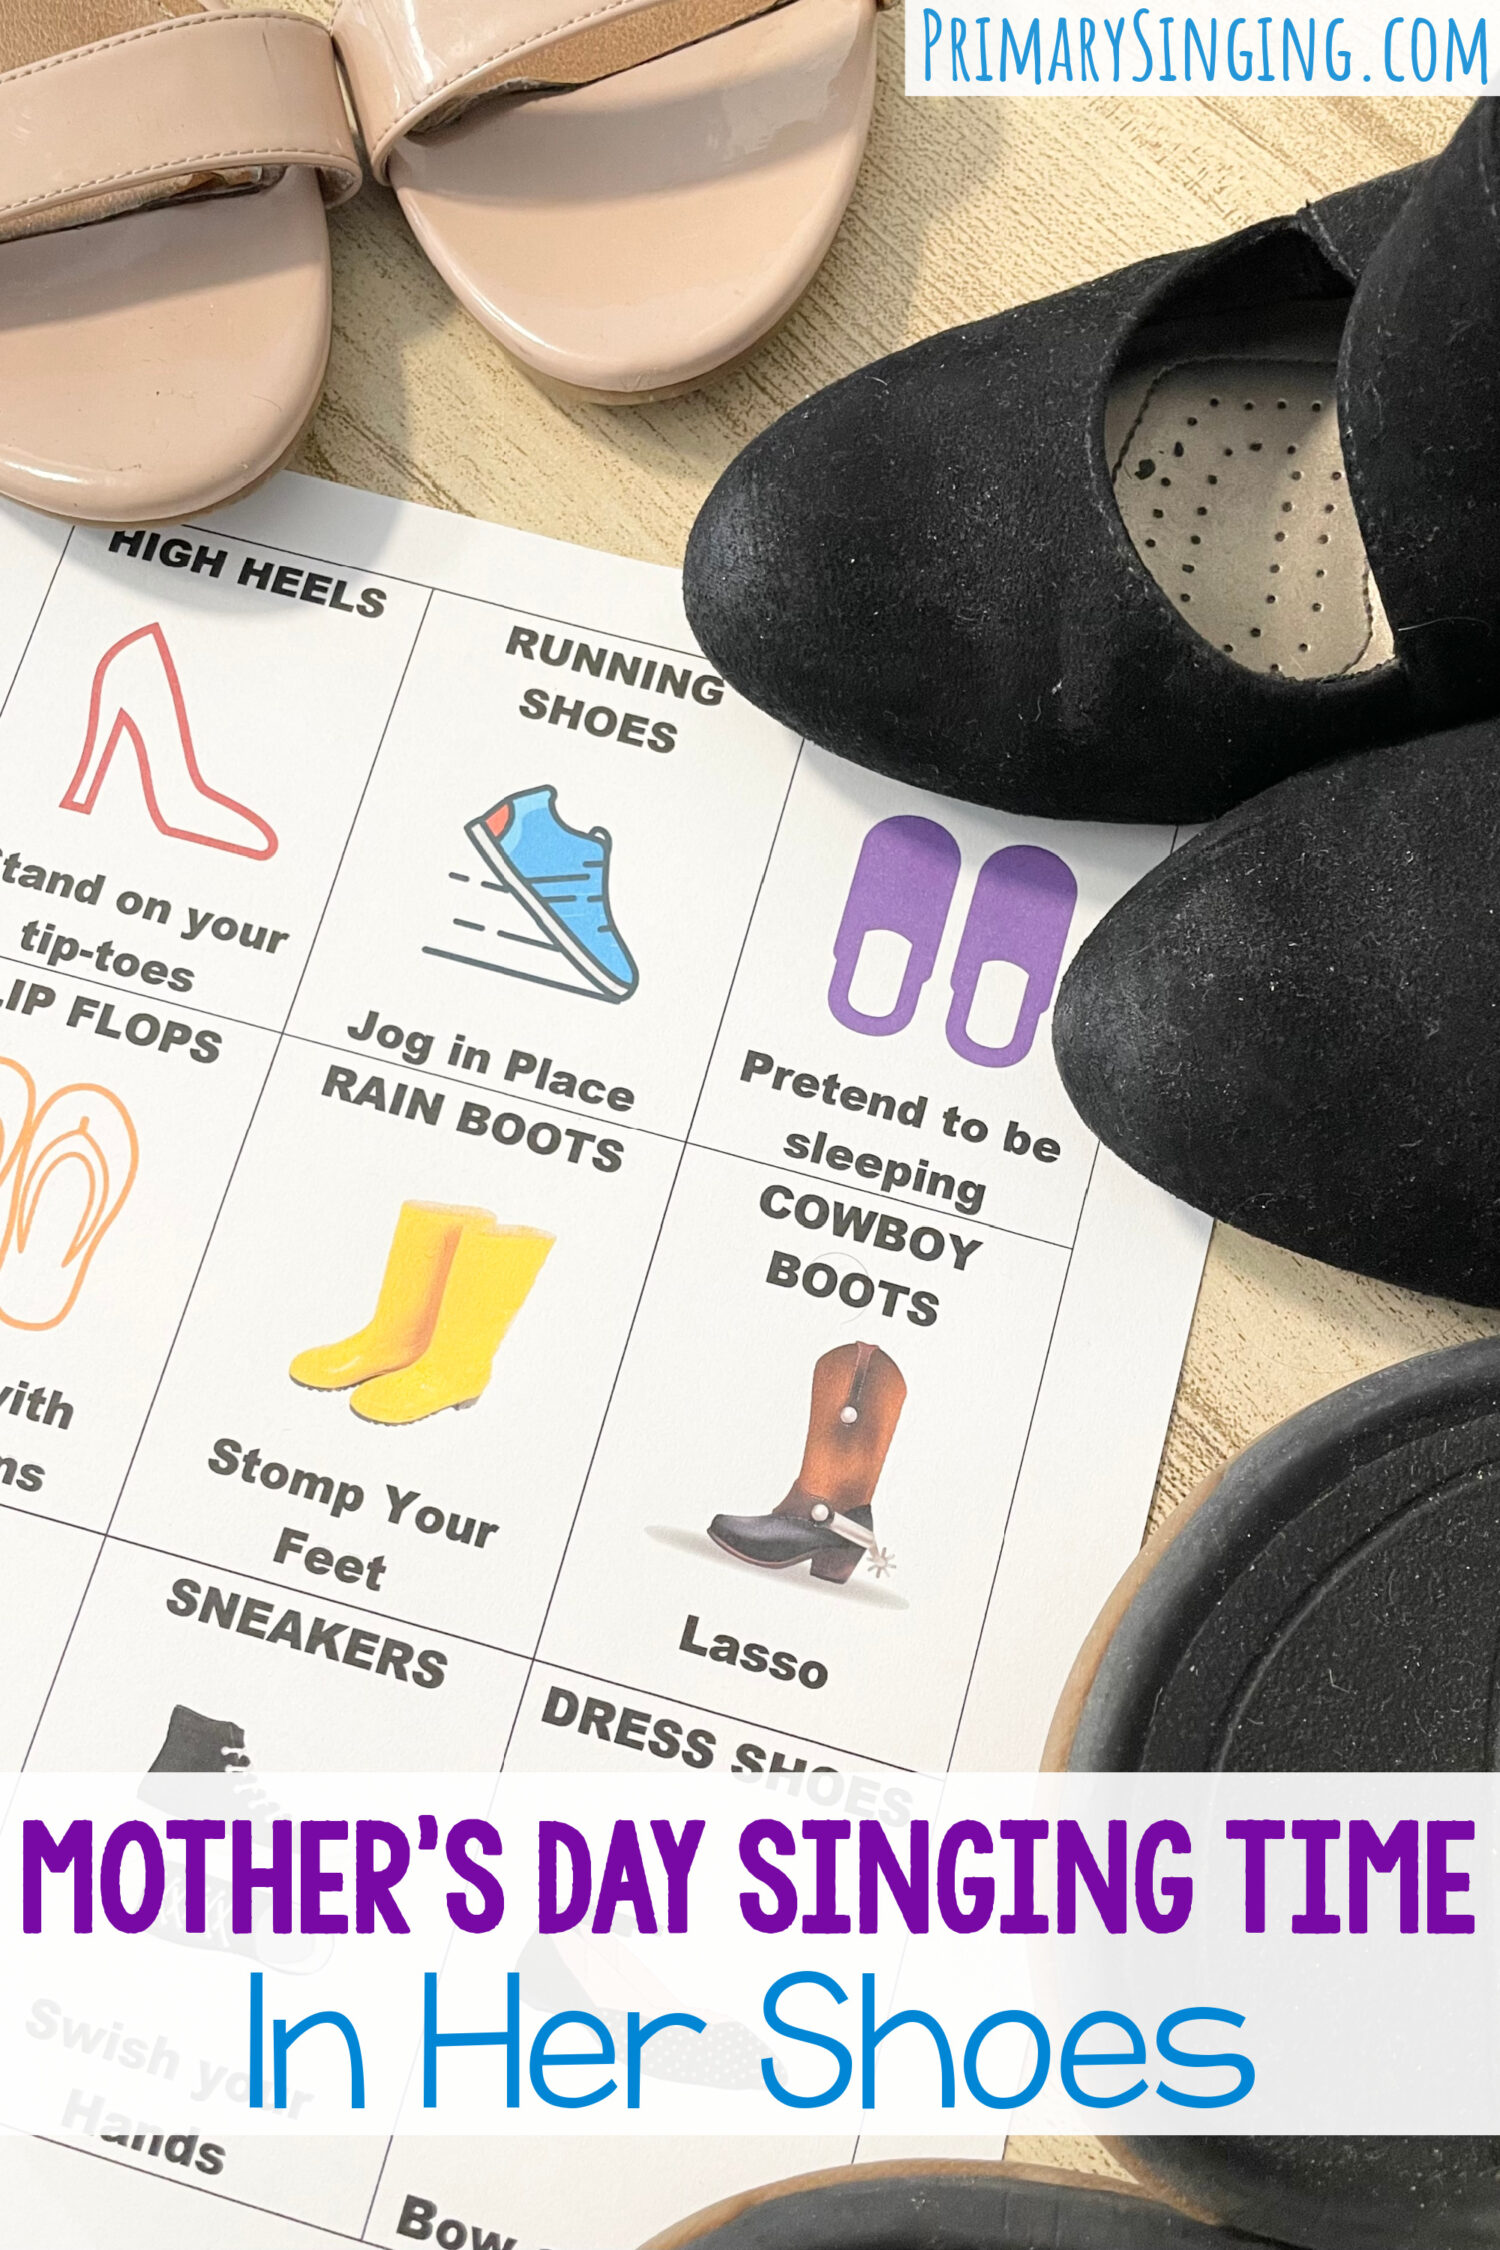 Use this fun Mother's Day In Her Shoes singing time idea for children to try on Mom's shoes and lead the Mother's Day song for LDS Primary Music Leaders.